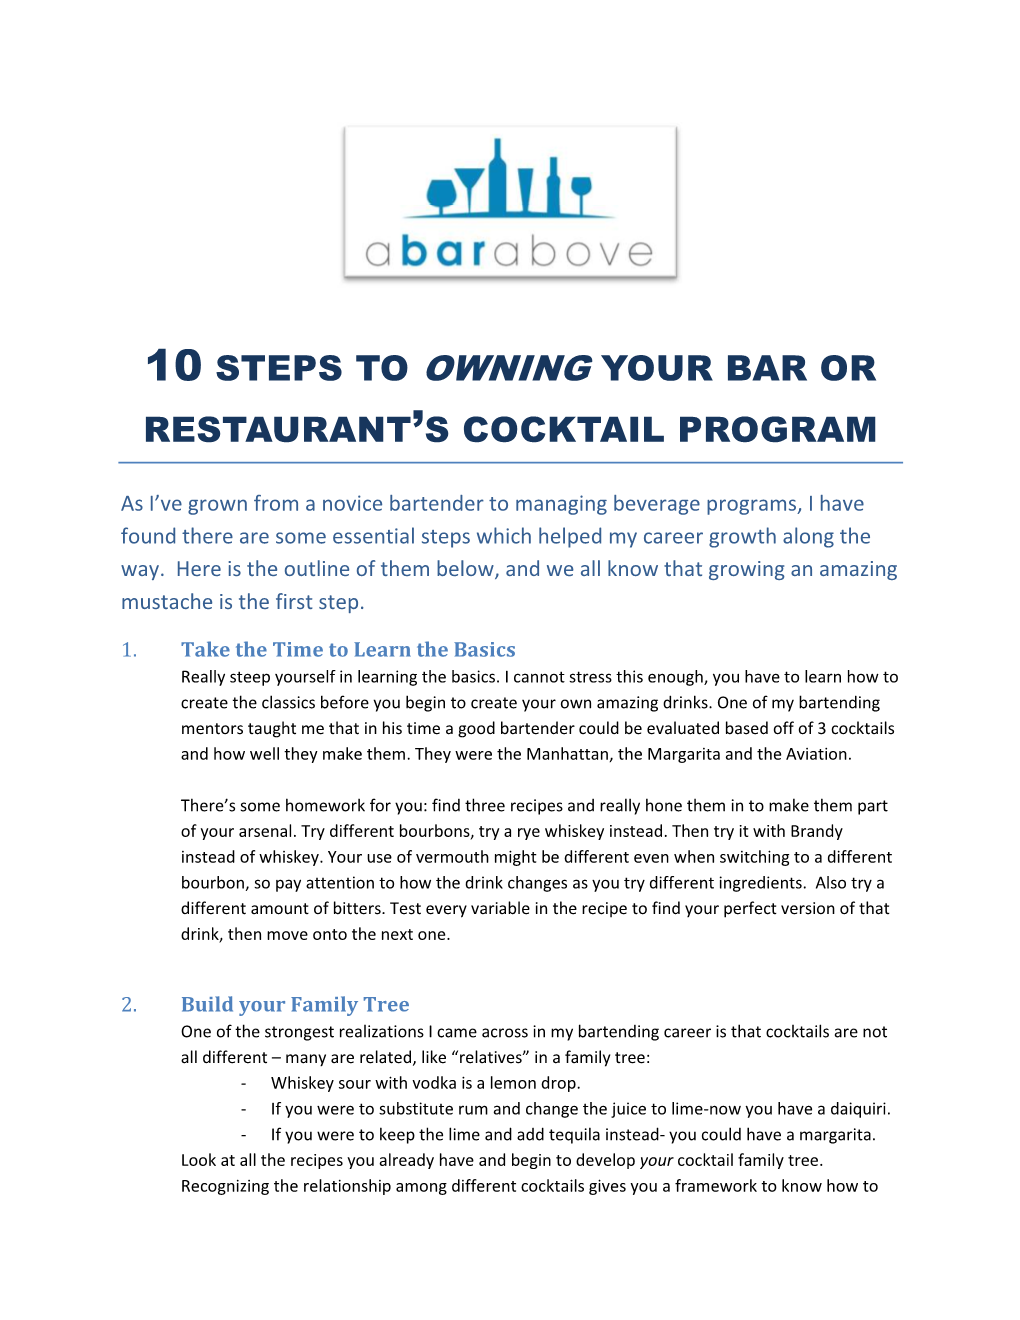 10 Steps to Owning Your Bar Or Restaurant's Cocktail